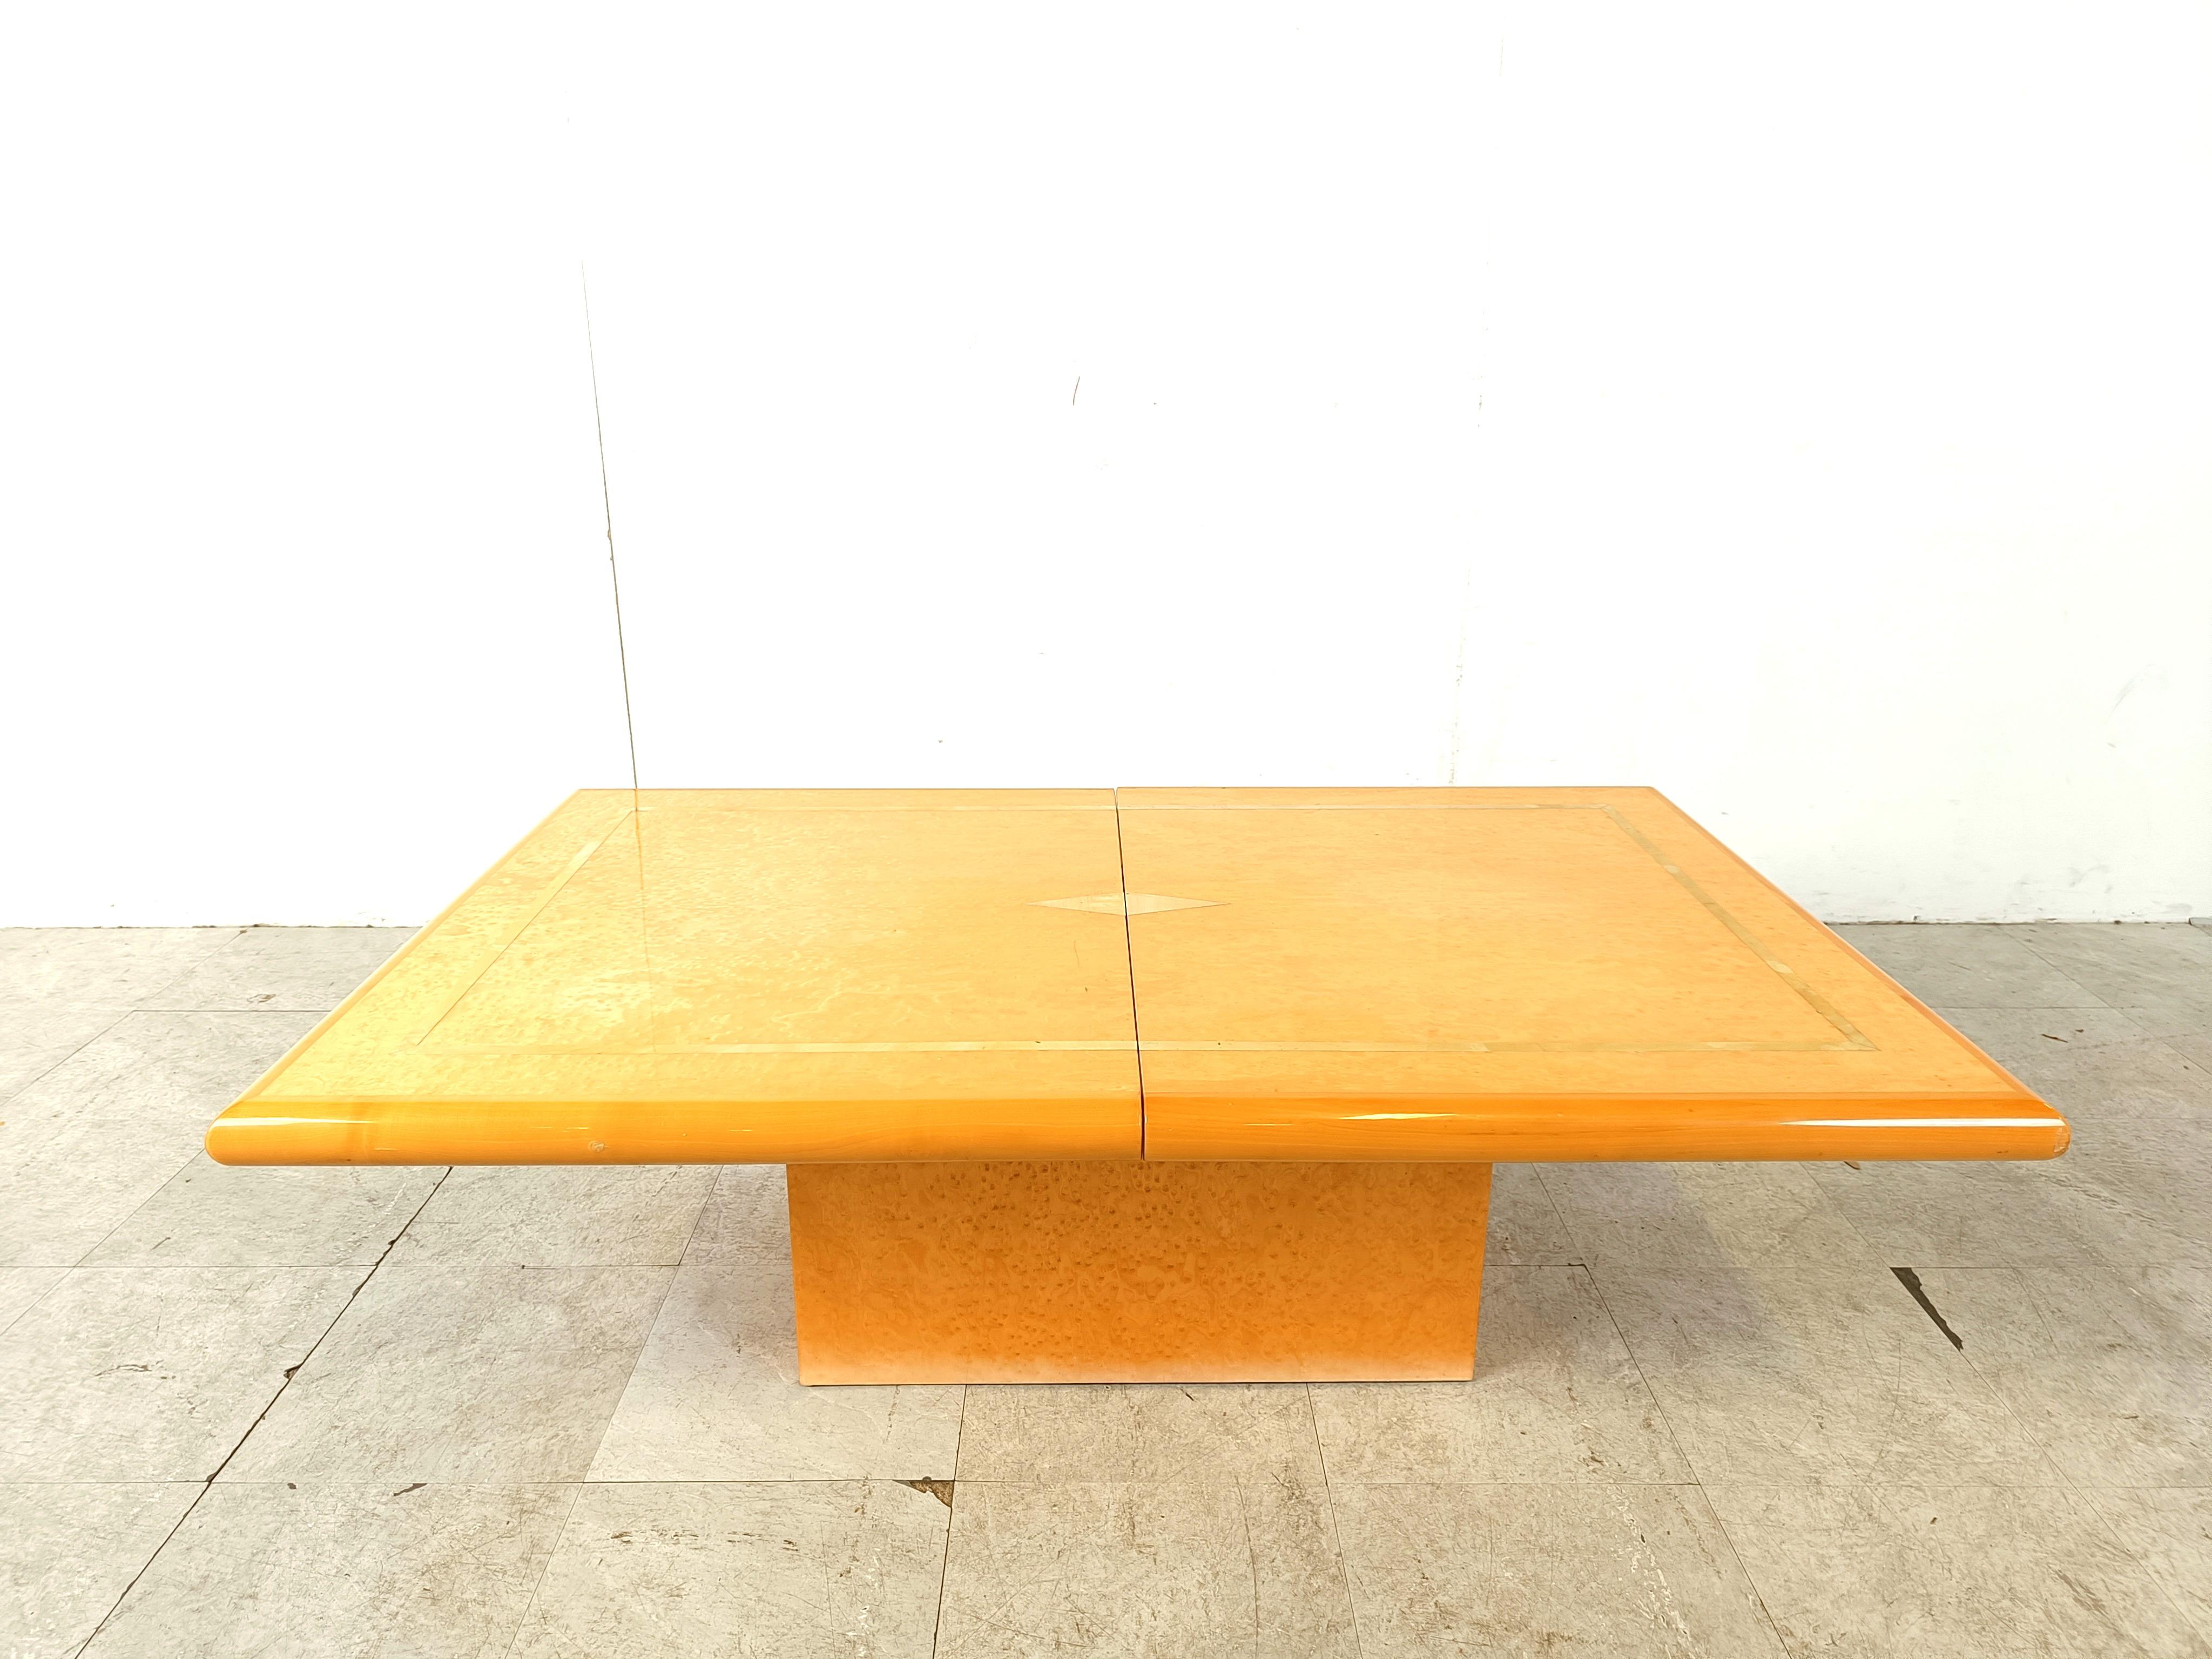 Exquisite wooden coffee table by Eric Maville.

This luxurious coffee table slides open to reveal a mirrored storage space for bottles and glass. 

Attractive veneer wooden top with inlaid brass troughout.

Very good condition

1970s -